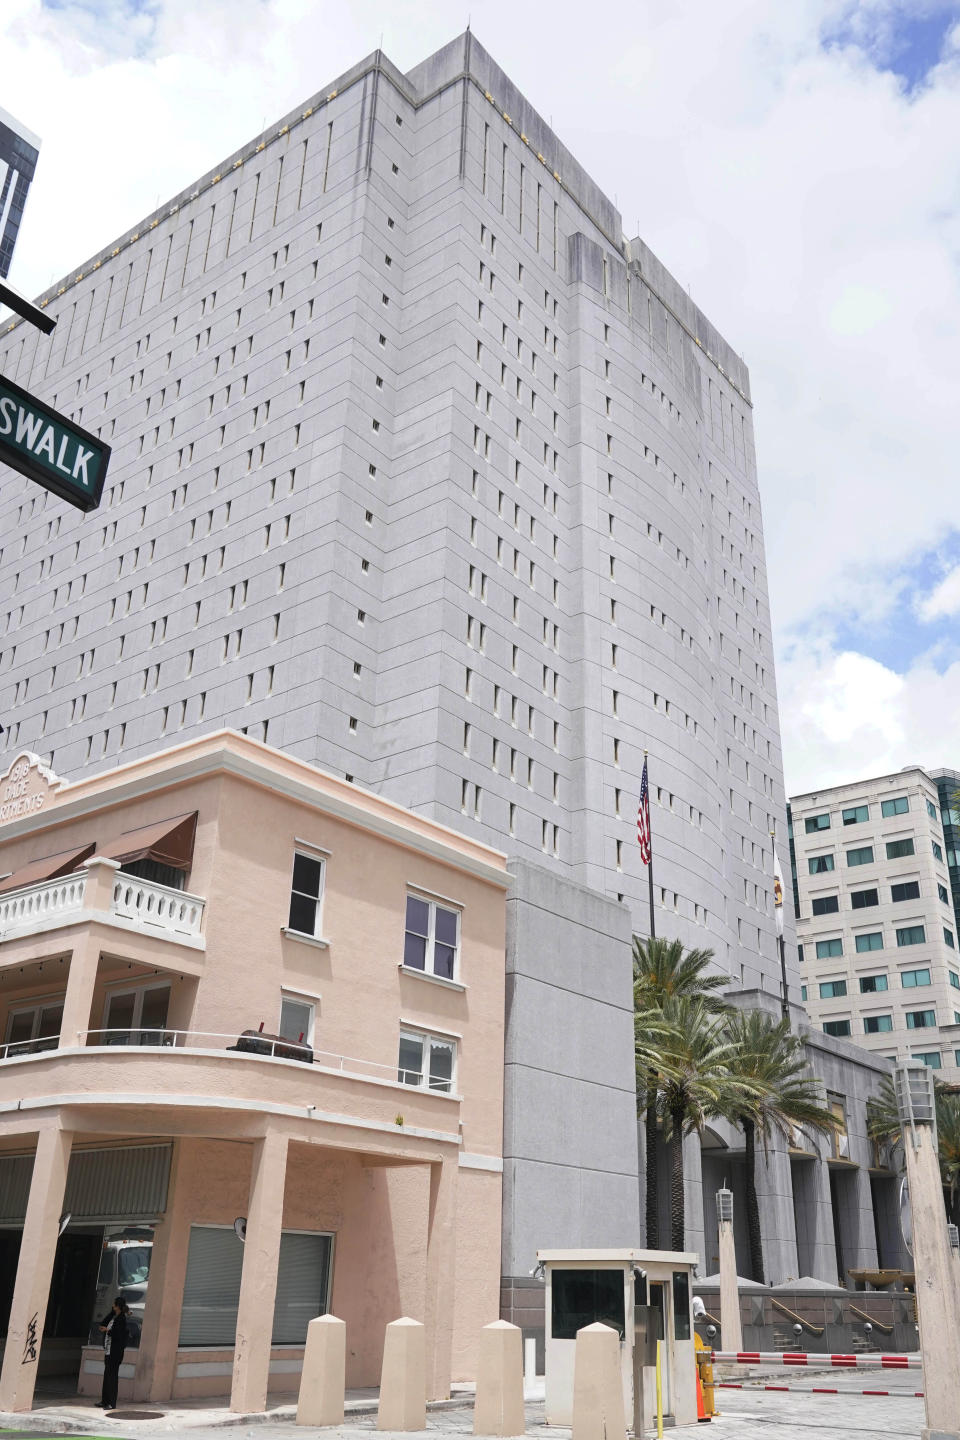 The Federal Detention Center in Miami is shown Friday, April 29, 2022. The Premier of the British Virgin Islands Andrew Alturo Fahie and Managing Director Oleanvine Maynard are being held at the, facility following their arrest on drug smuggling charges . (AP Photo/Marta Lavandier)